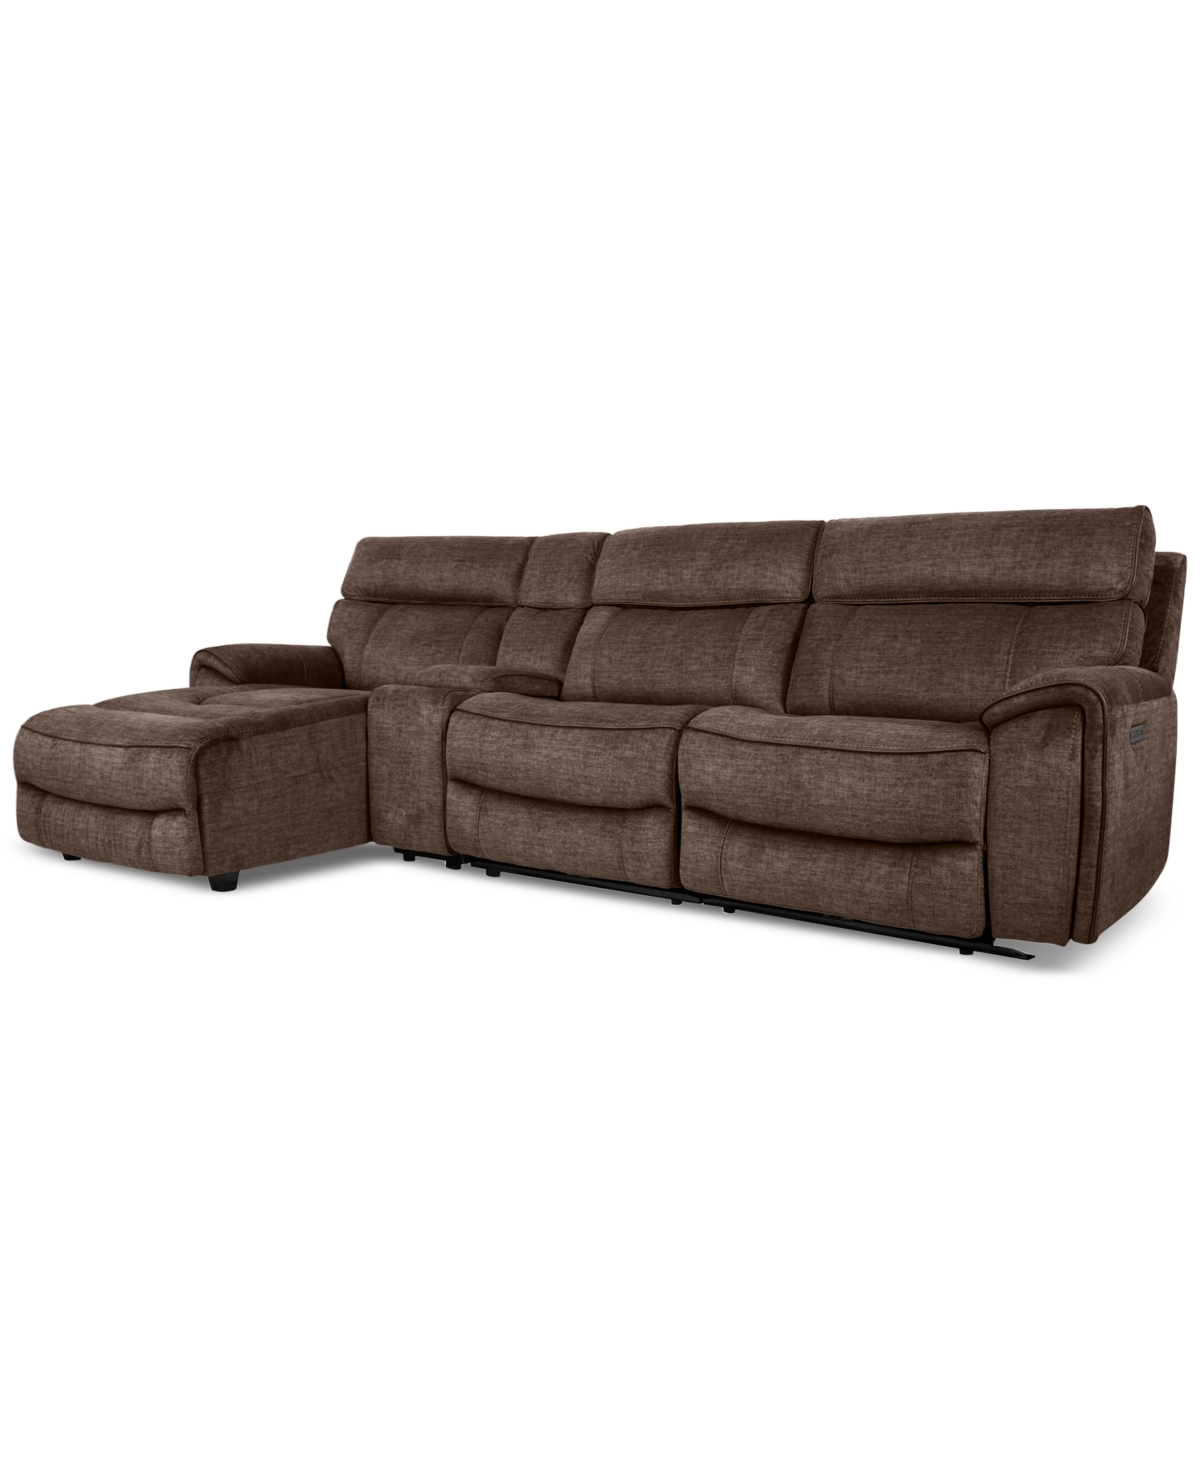 Furniture Hutchenson 4-pc. Fabric Chaise Sectional With 1 Power Recliner, Power Headrest And Console In Chocolate Brown